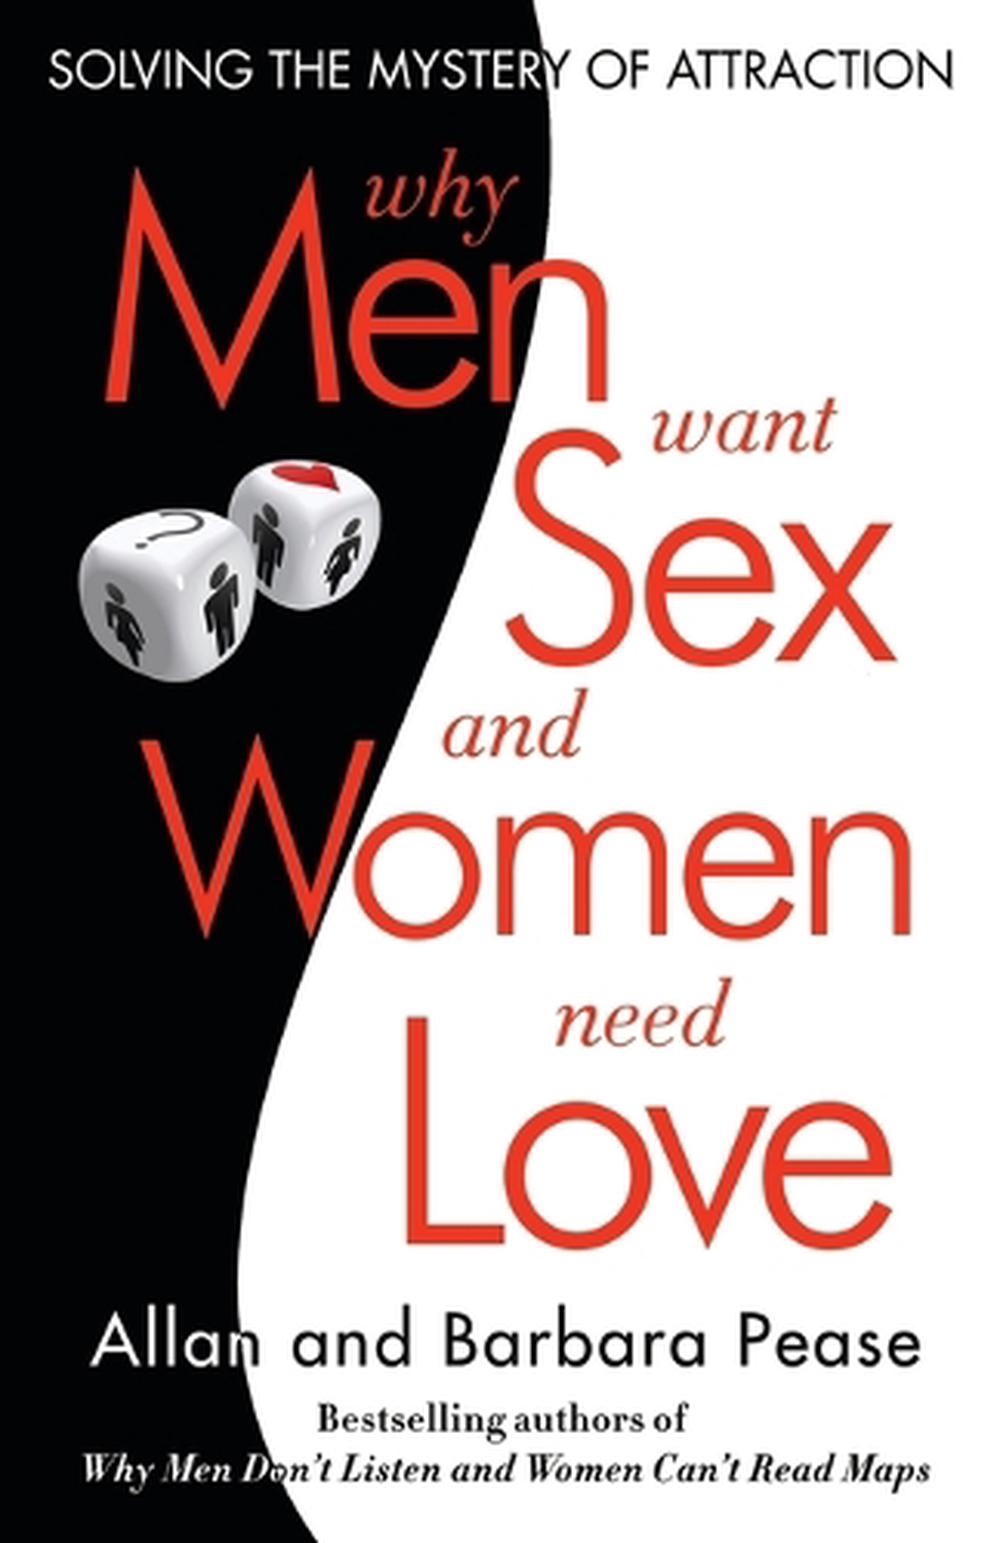 Why Men Want Sex And Women Need Love By Barbara Pease Paperback 9780307591593 Buy Online At 7572